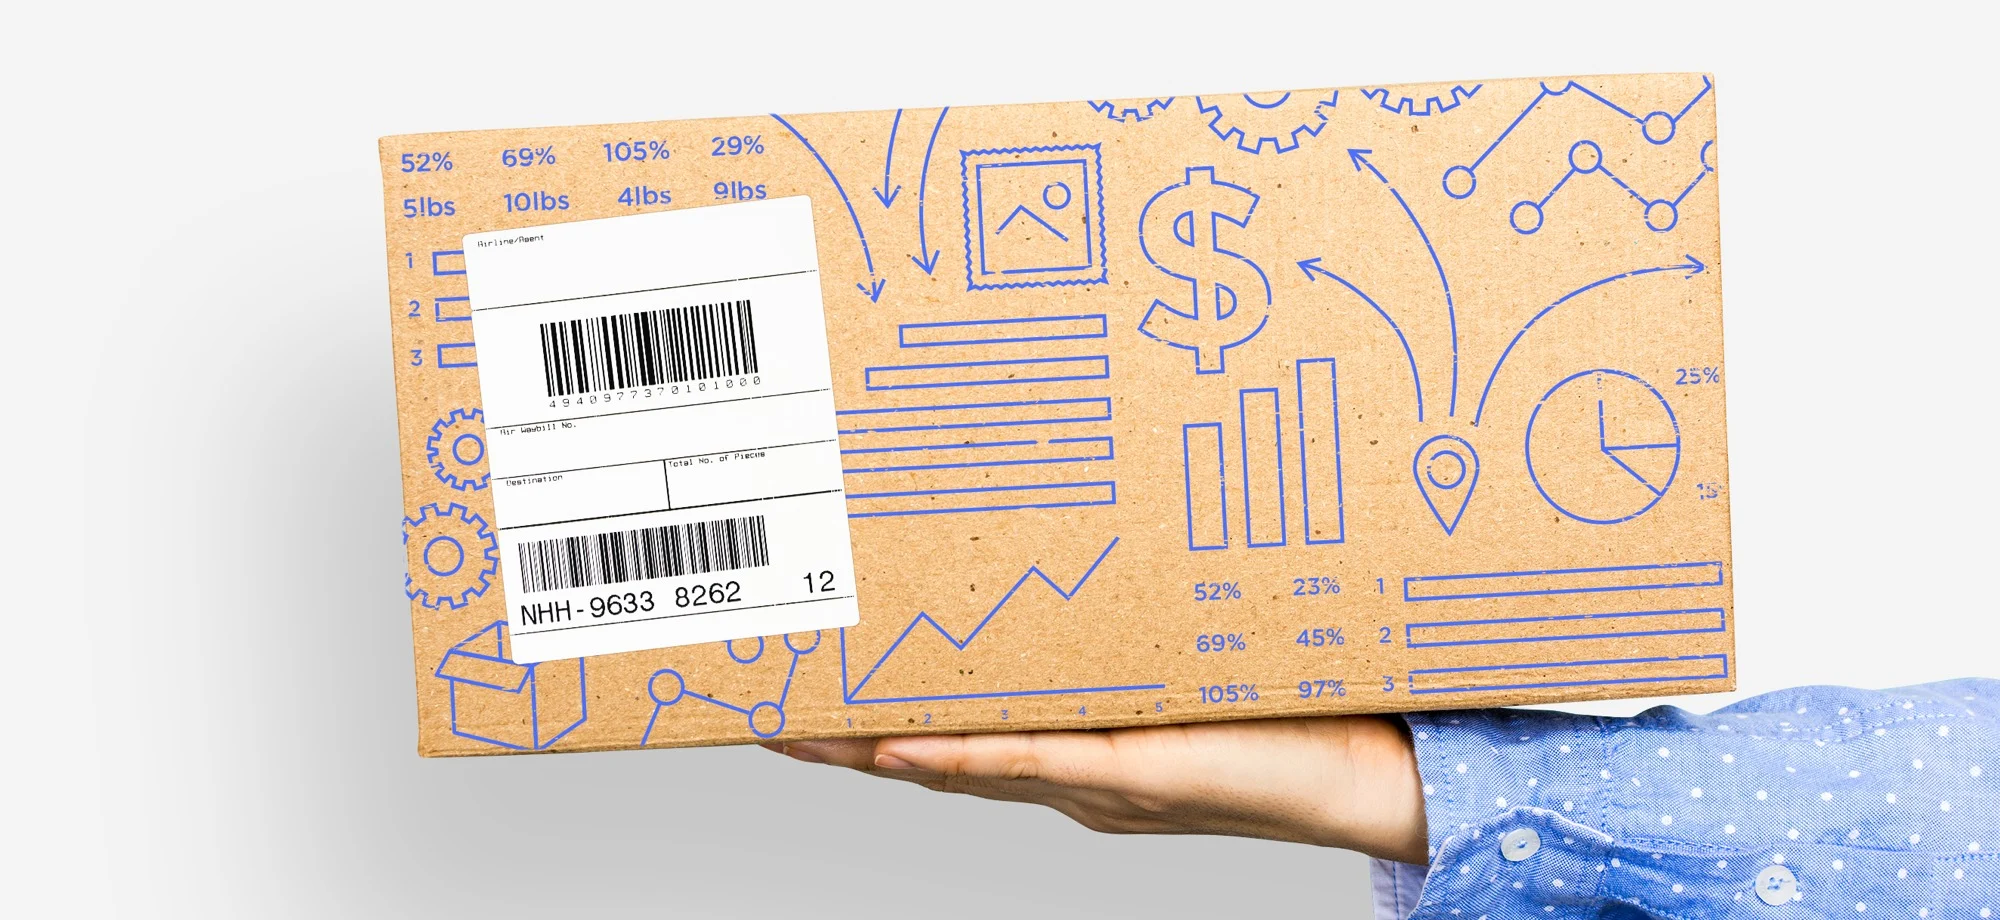 How to calculate shipping fees based on order quantity